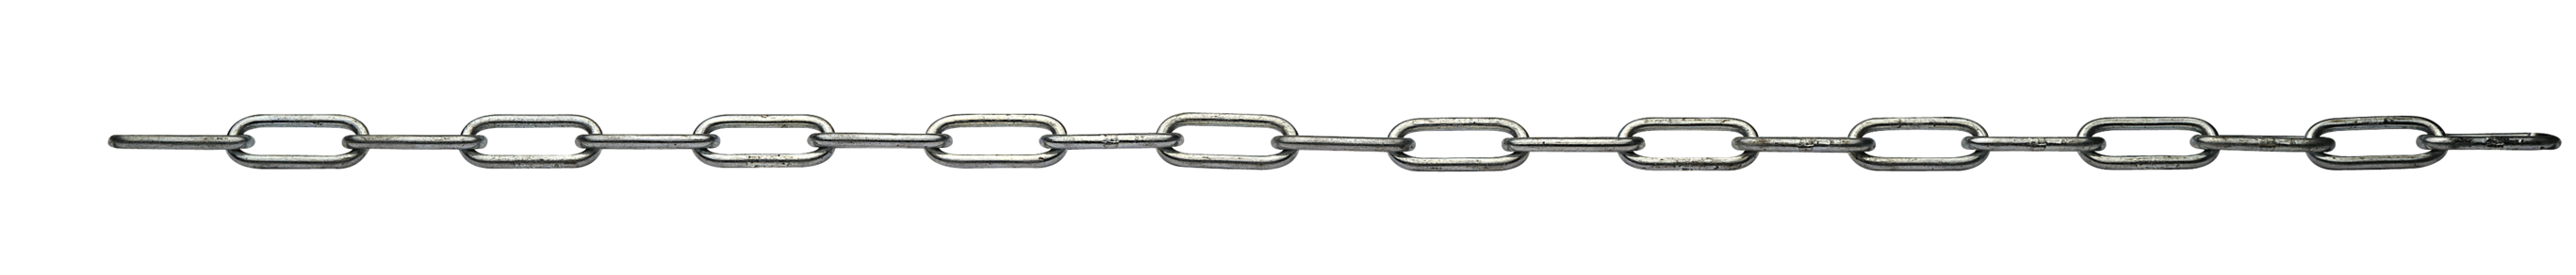 Chain Png Image - Chain, Transparent background PNG HD thumbnail